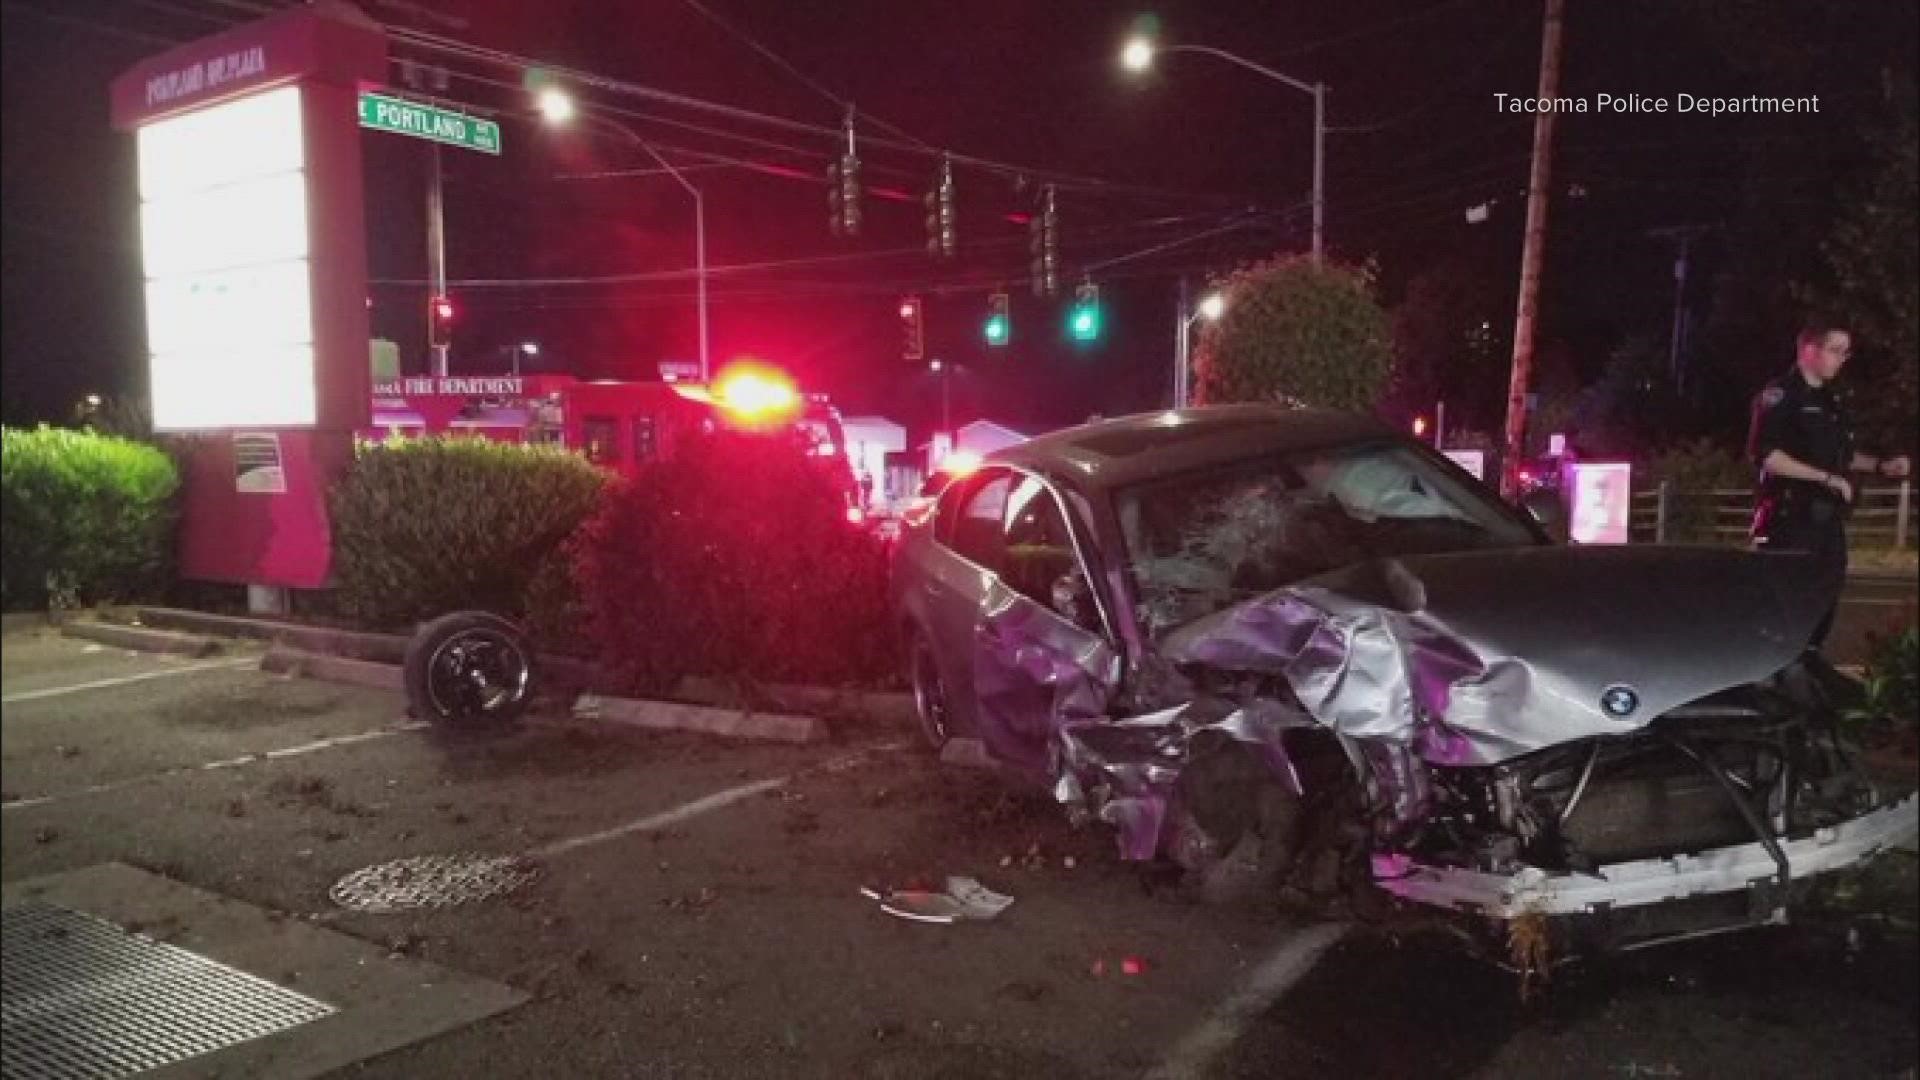 A driver was arrested after running a red light and crashing into a Tacoma police vehicle. Police said the driver was taken into custody after a short foot pursuit.